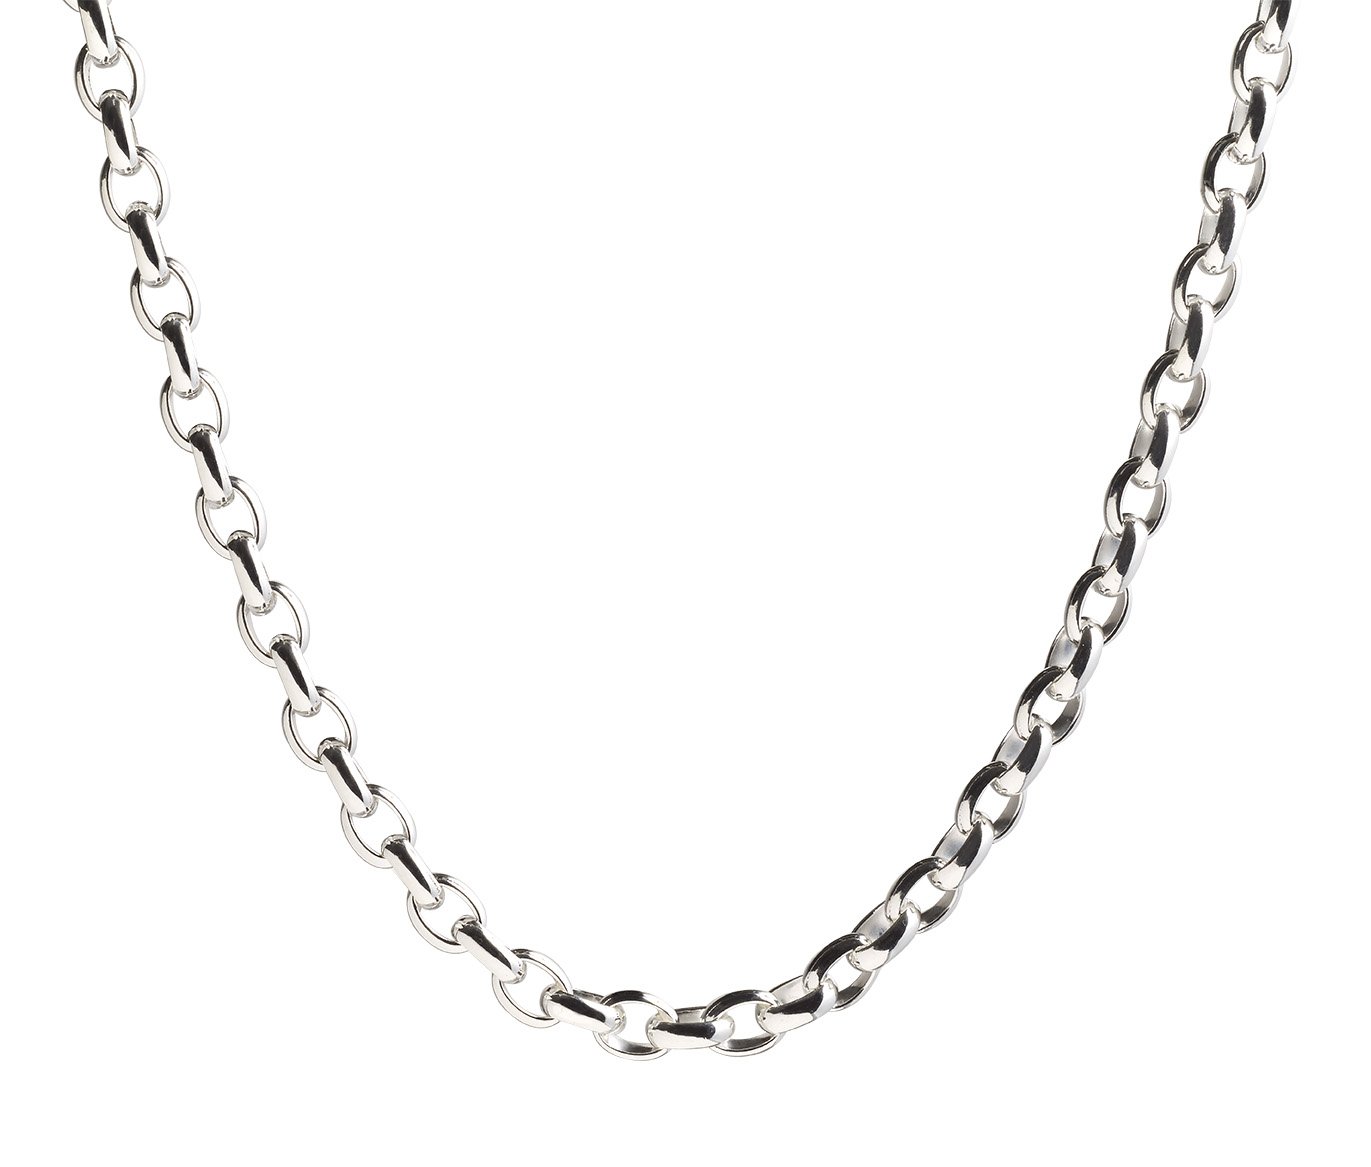 Silver Necklace Chain Png | lupon.gov.ph